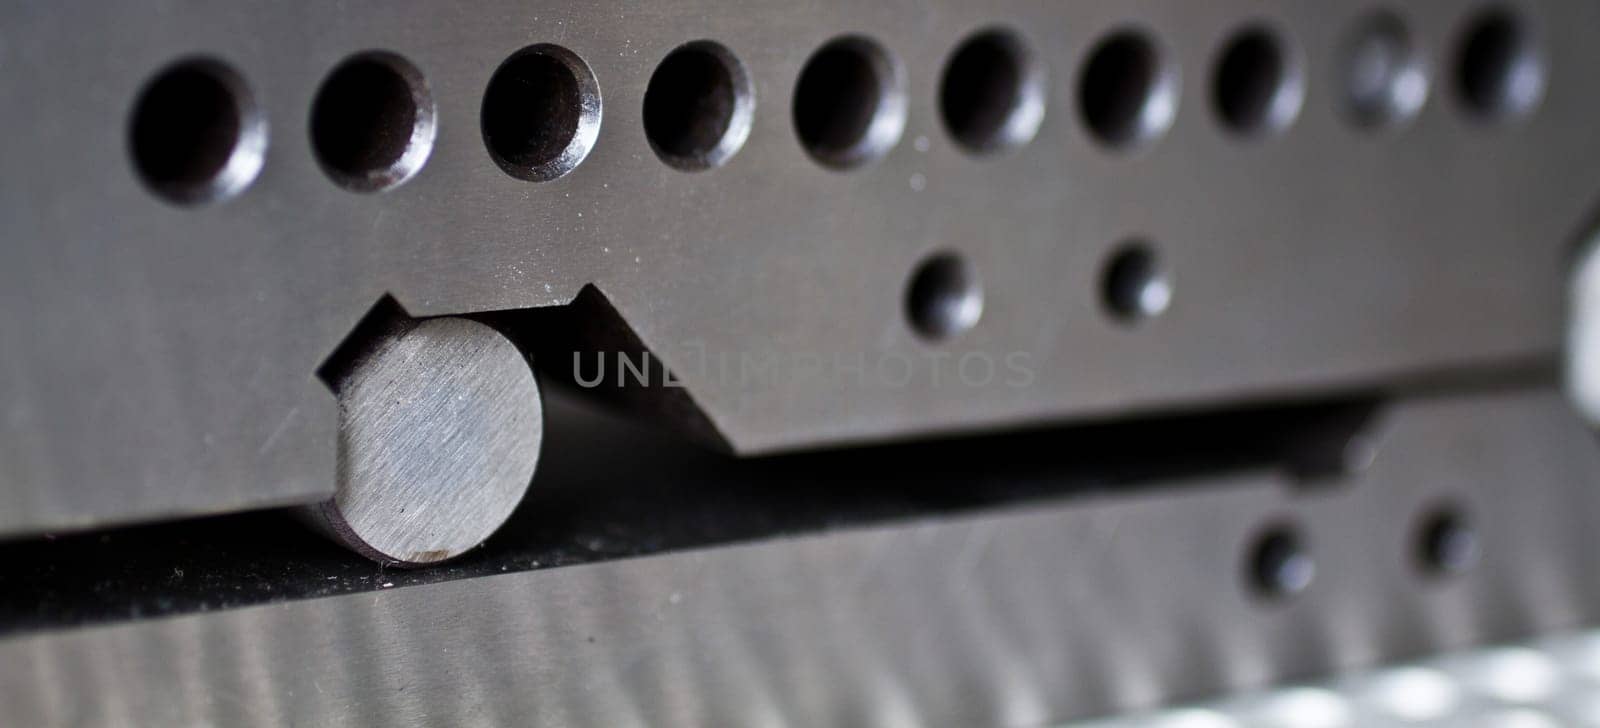 Precision engineering at its finest: A metal peg perfectly fits into a meticulously crafted hole, showcasing the exacting standards of manufacturing. Captured in Fort Wayne, Indiana.